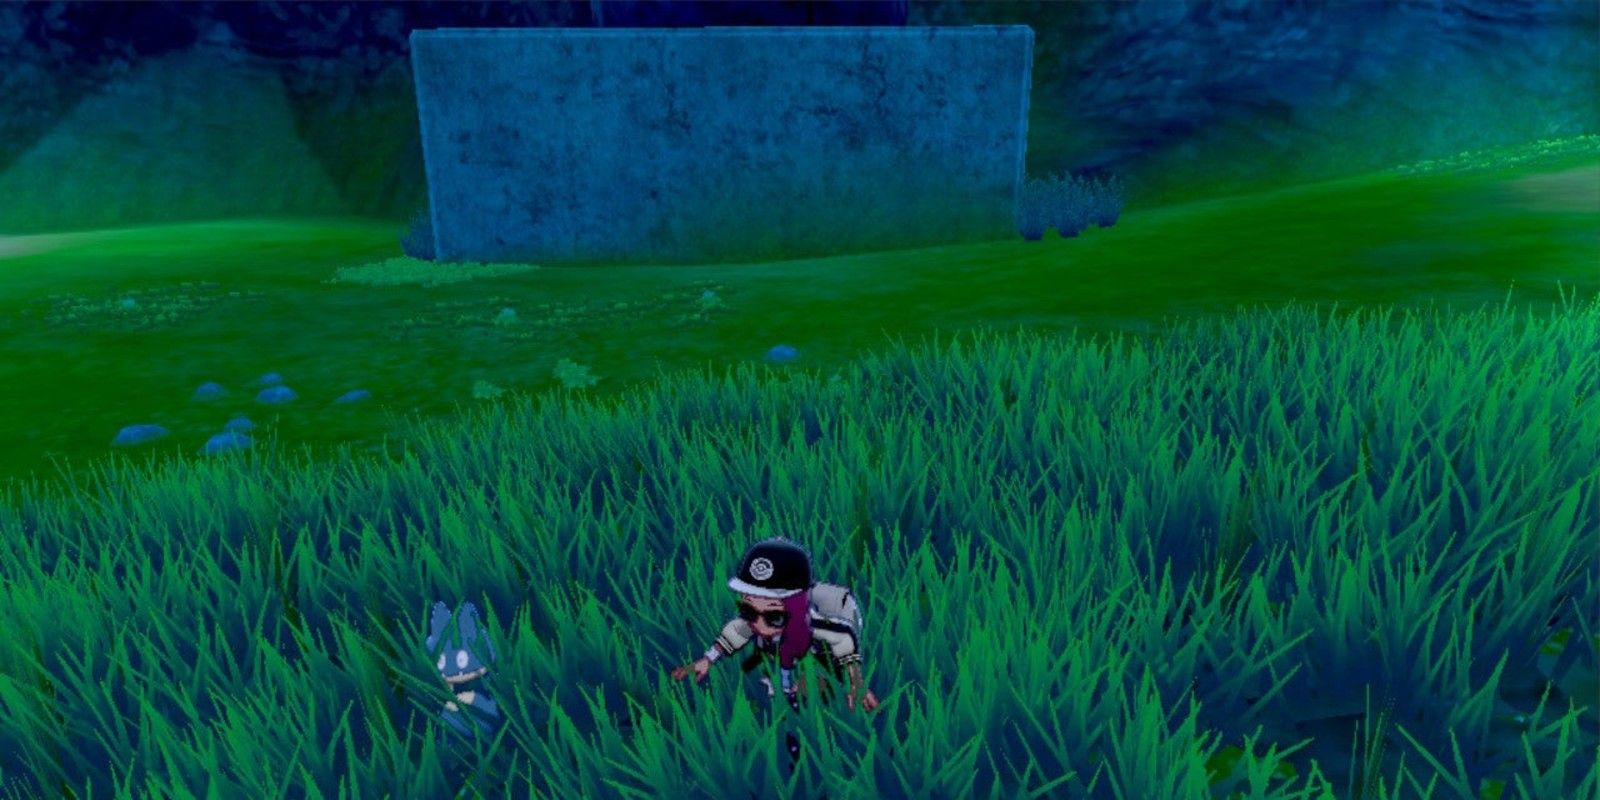 A player sneaks up on Munchlax in the tall grass in Pokemon Sword &amp; Shield